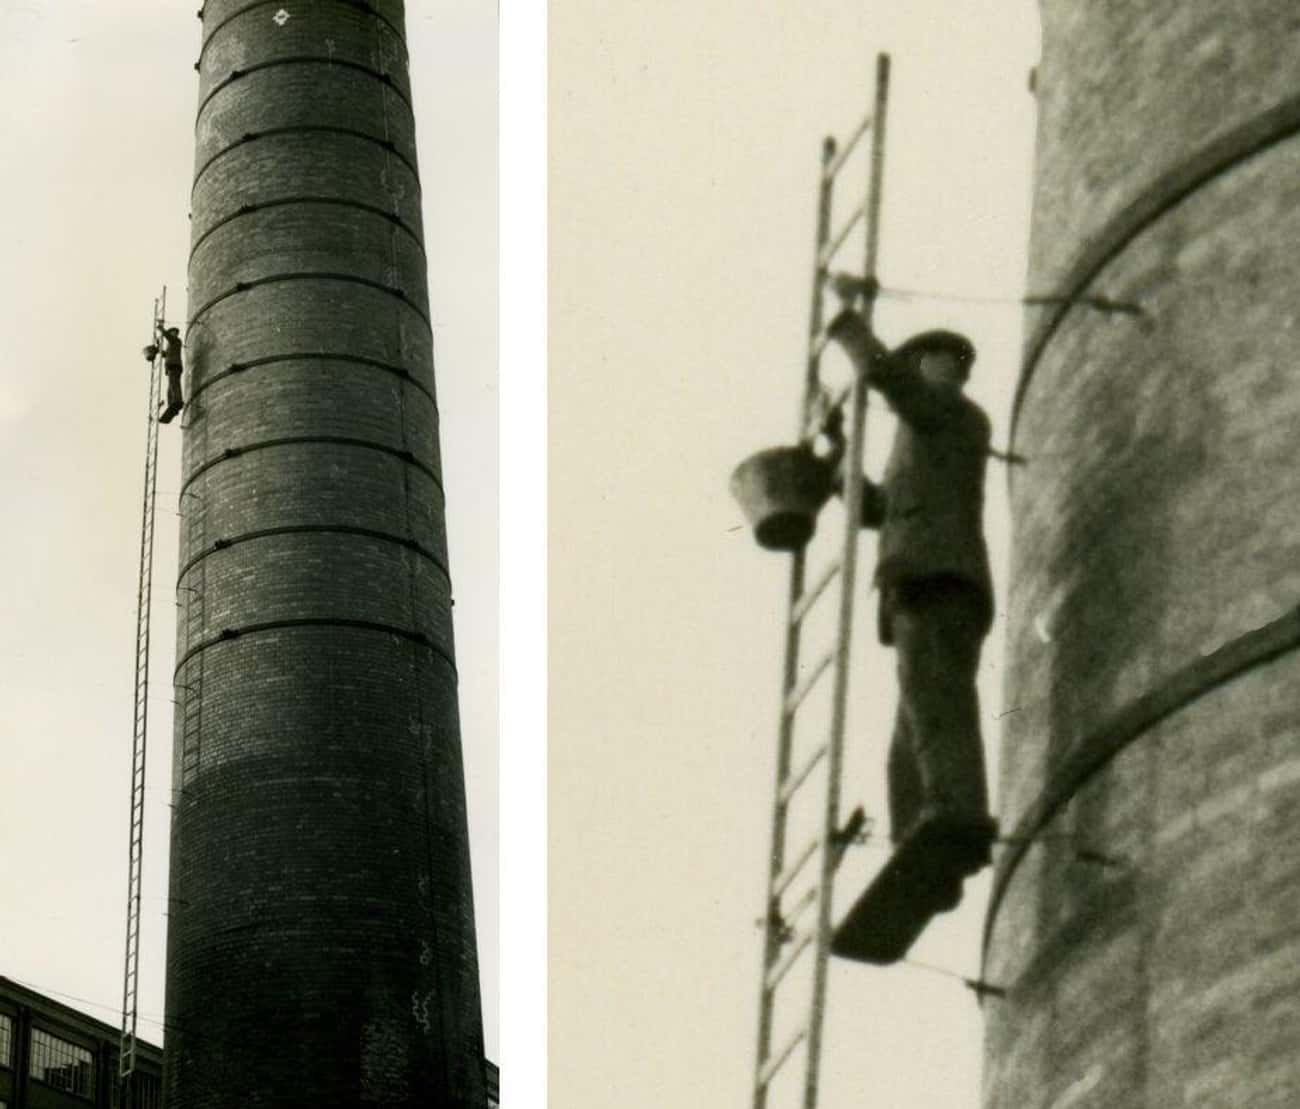 An English Steeplejack Working Without Any Apparent Safety Harness (c. 1960)